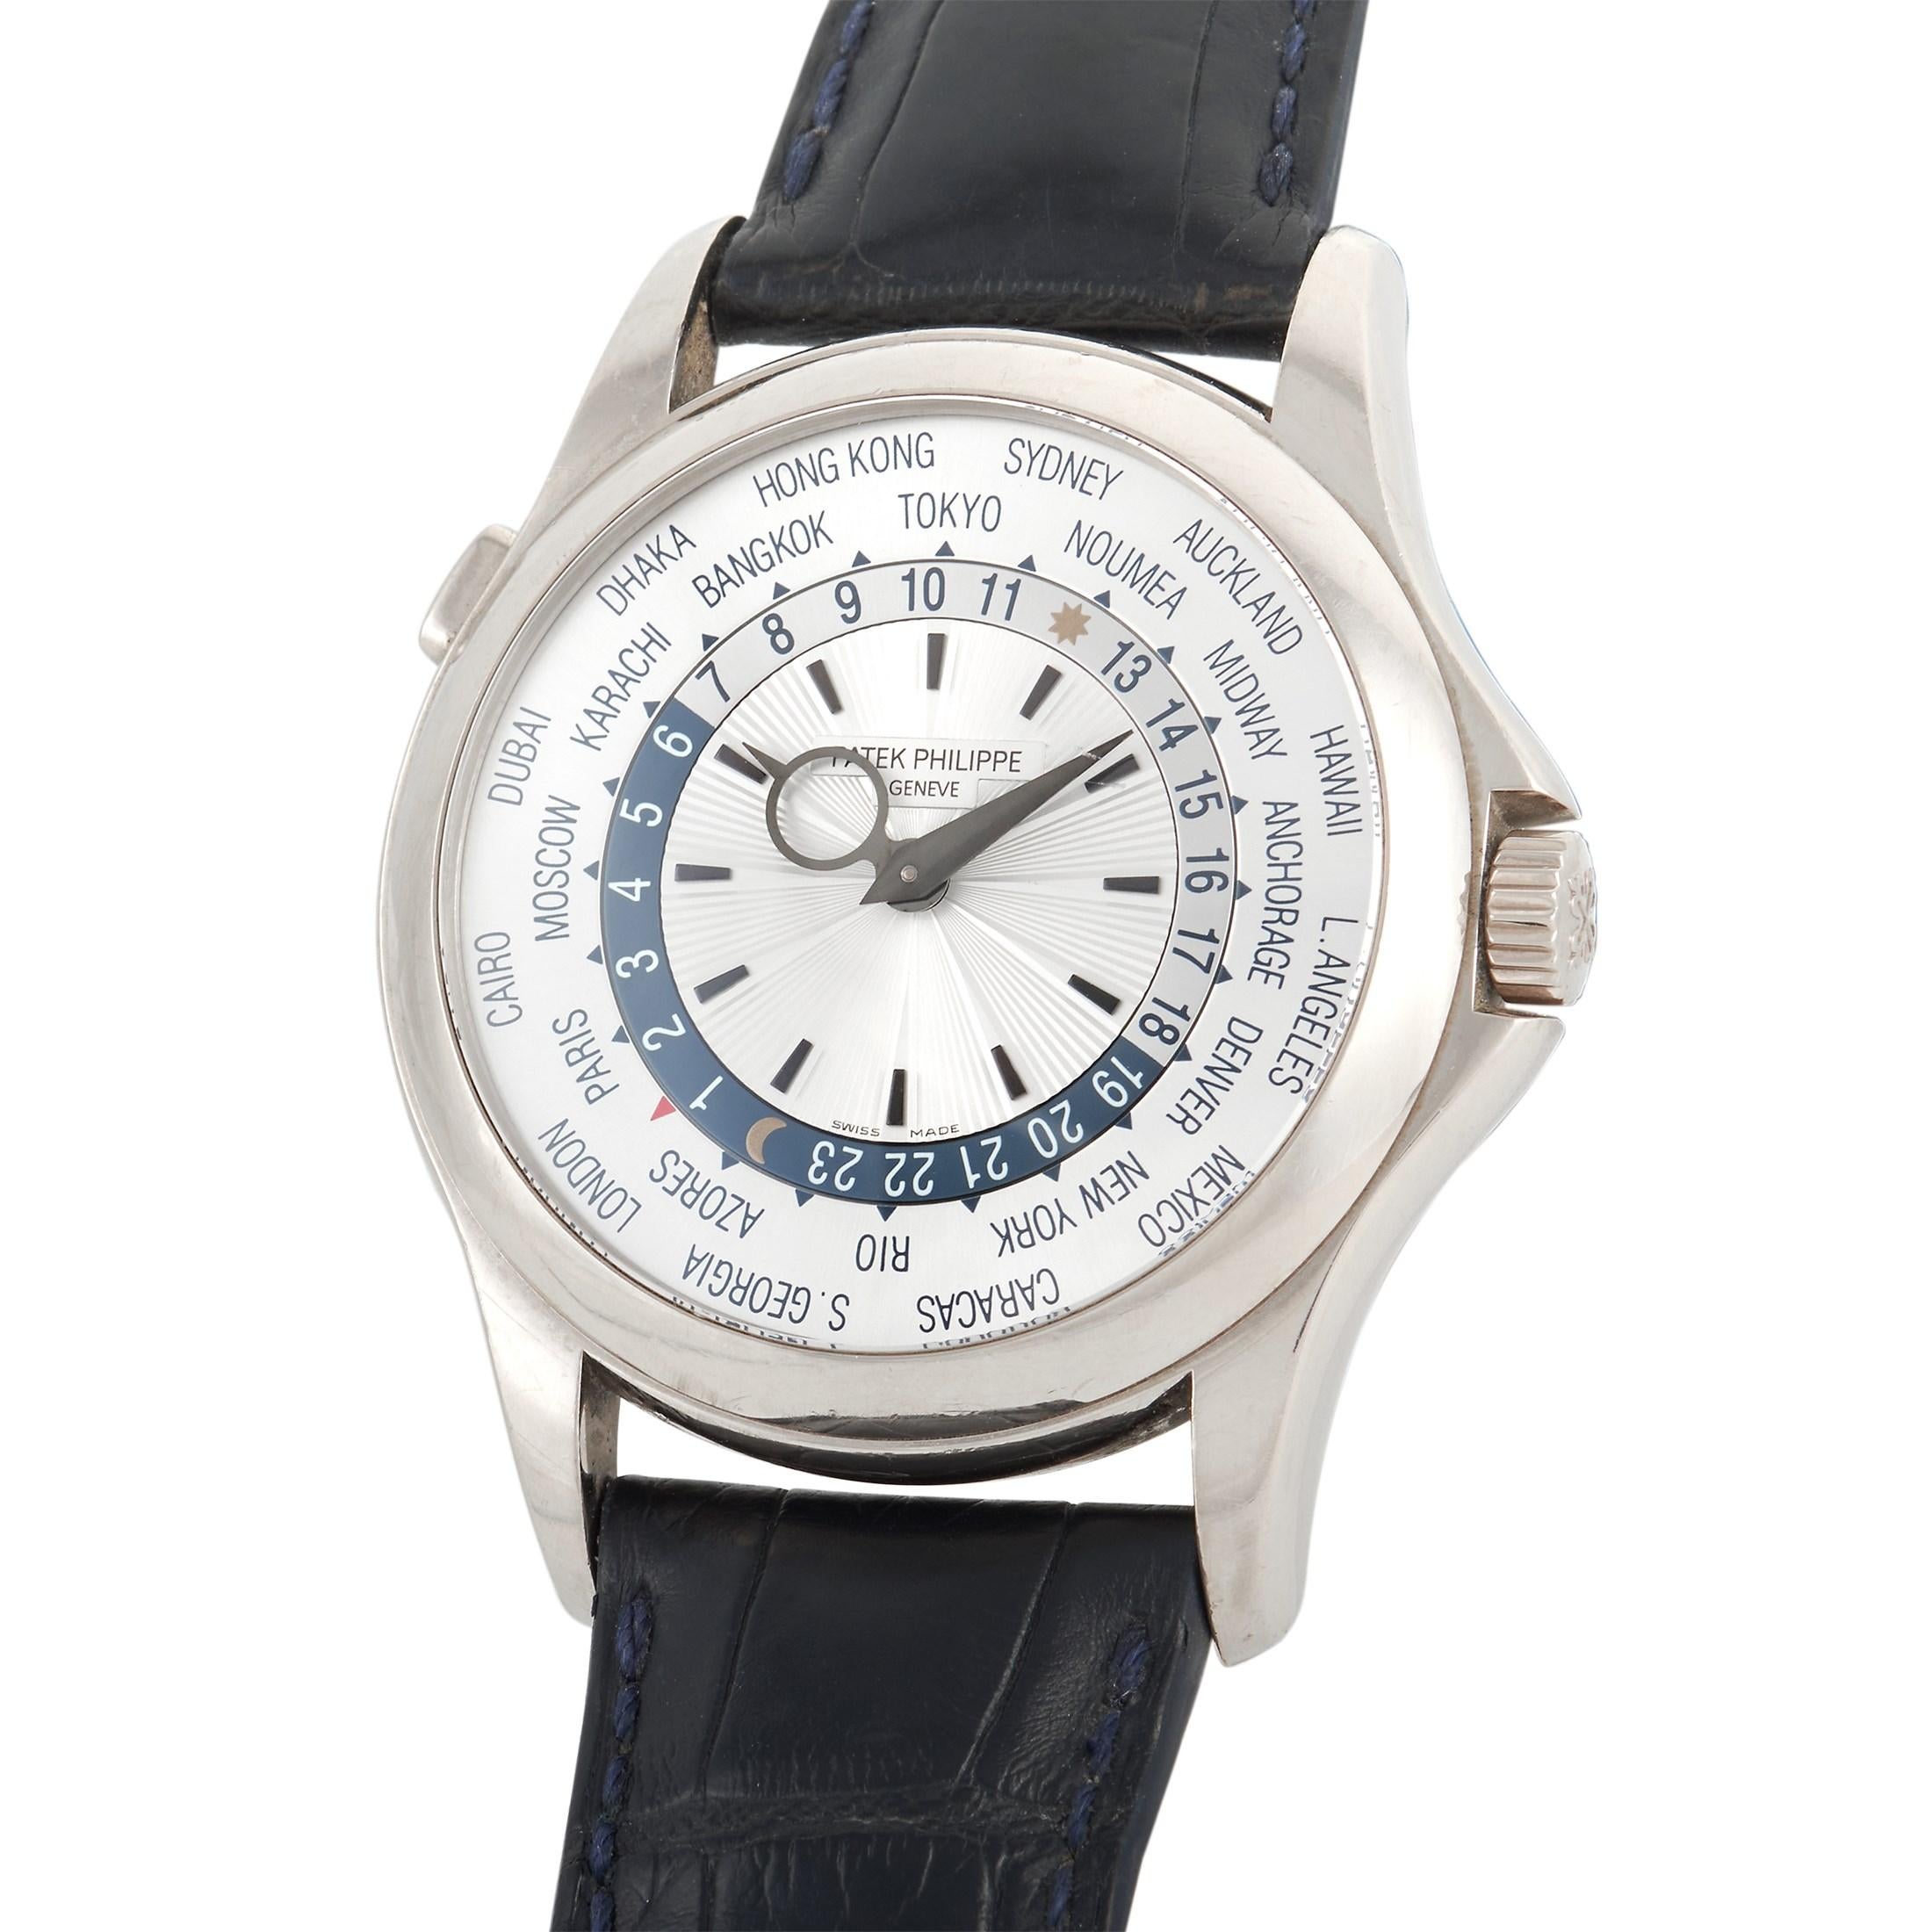 Patek Philippe World Time Watch, reference number 5130G-001, is a spectacular timepiece that will make sure you are always on schedule. 

Captivating in design, this watch begins with a 40mm case and bezel crafted from 18K White Gold. On the silver